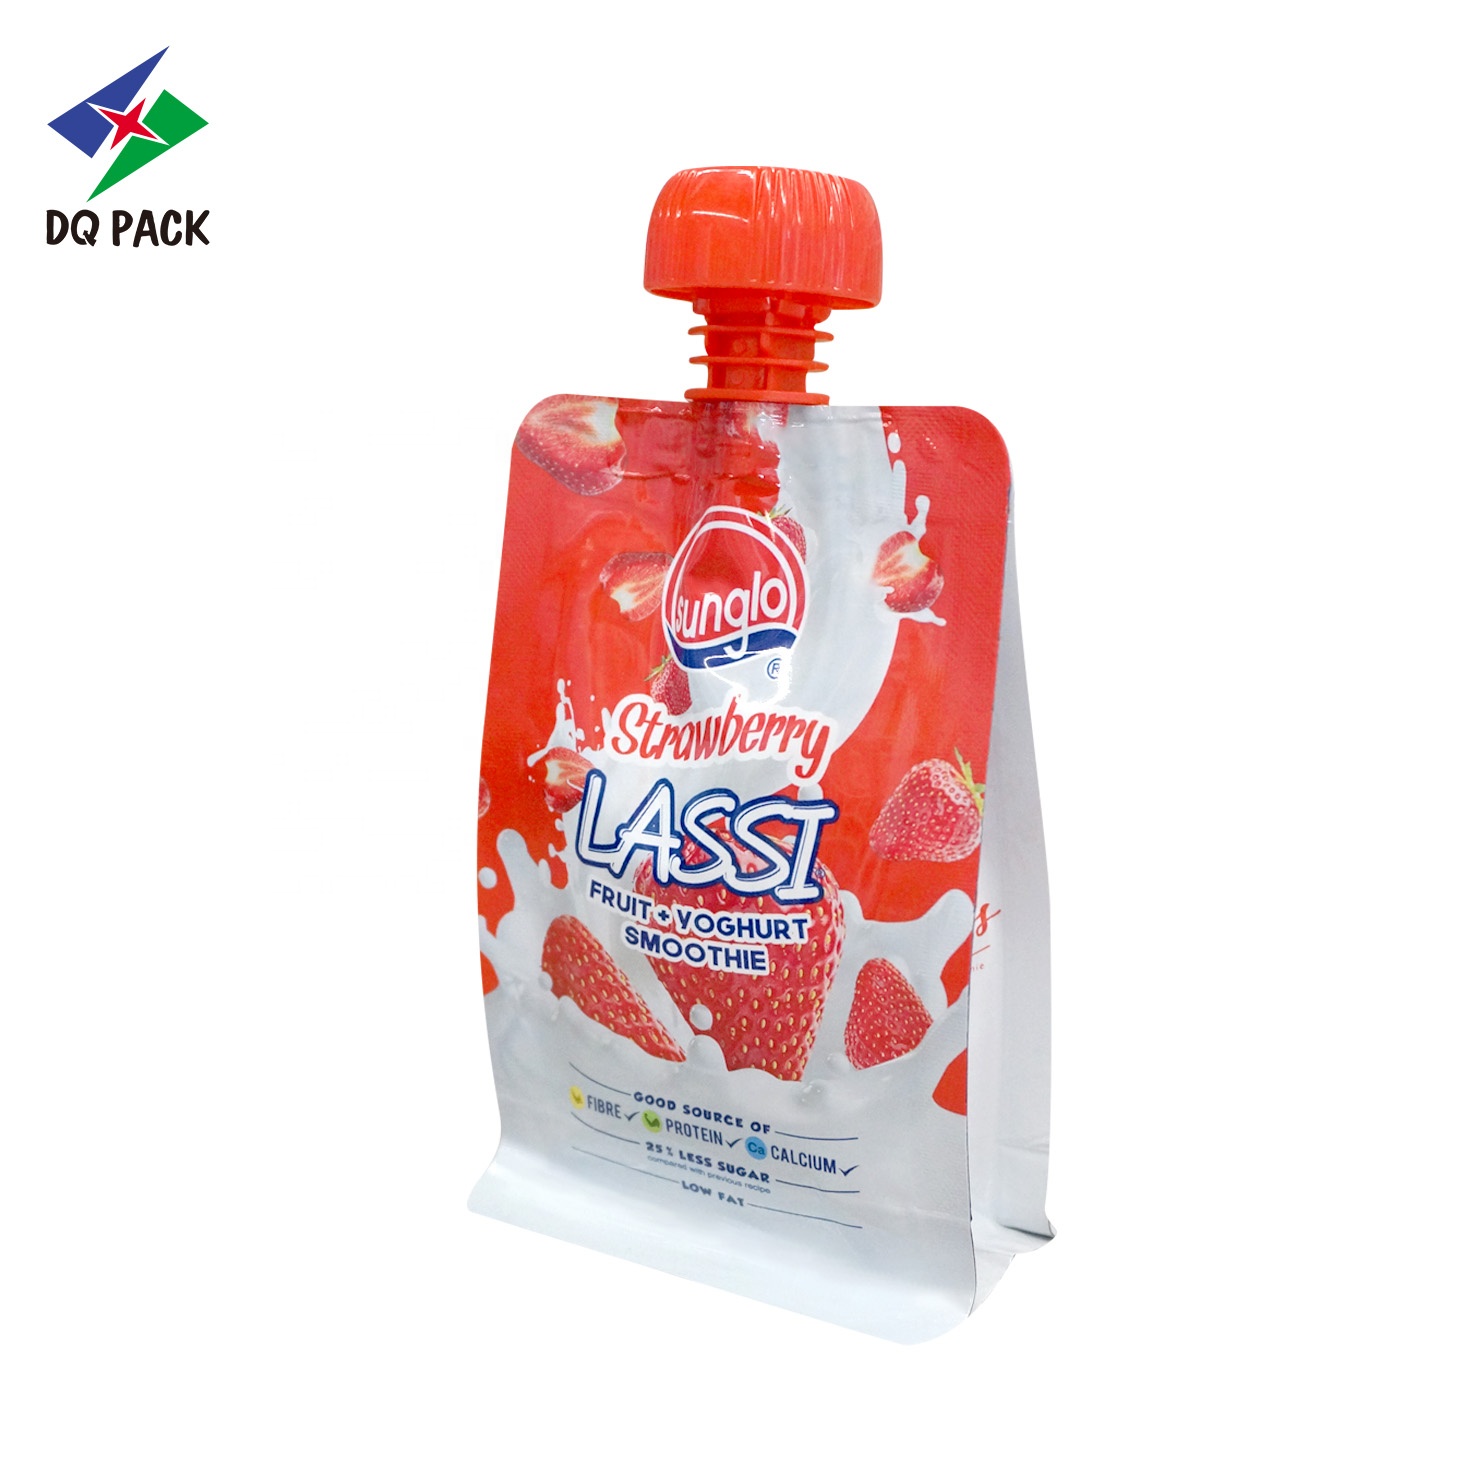 DQ PACK Custom Plastic Bags Square Bottom Pouch Doypack with suction nozzle for yogurt juice fruit puree packaging